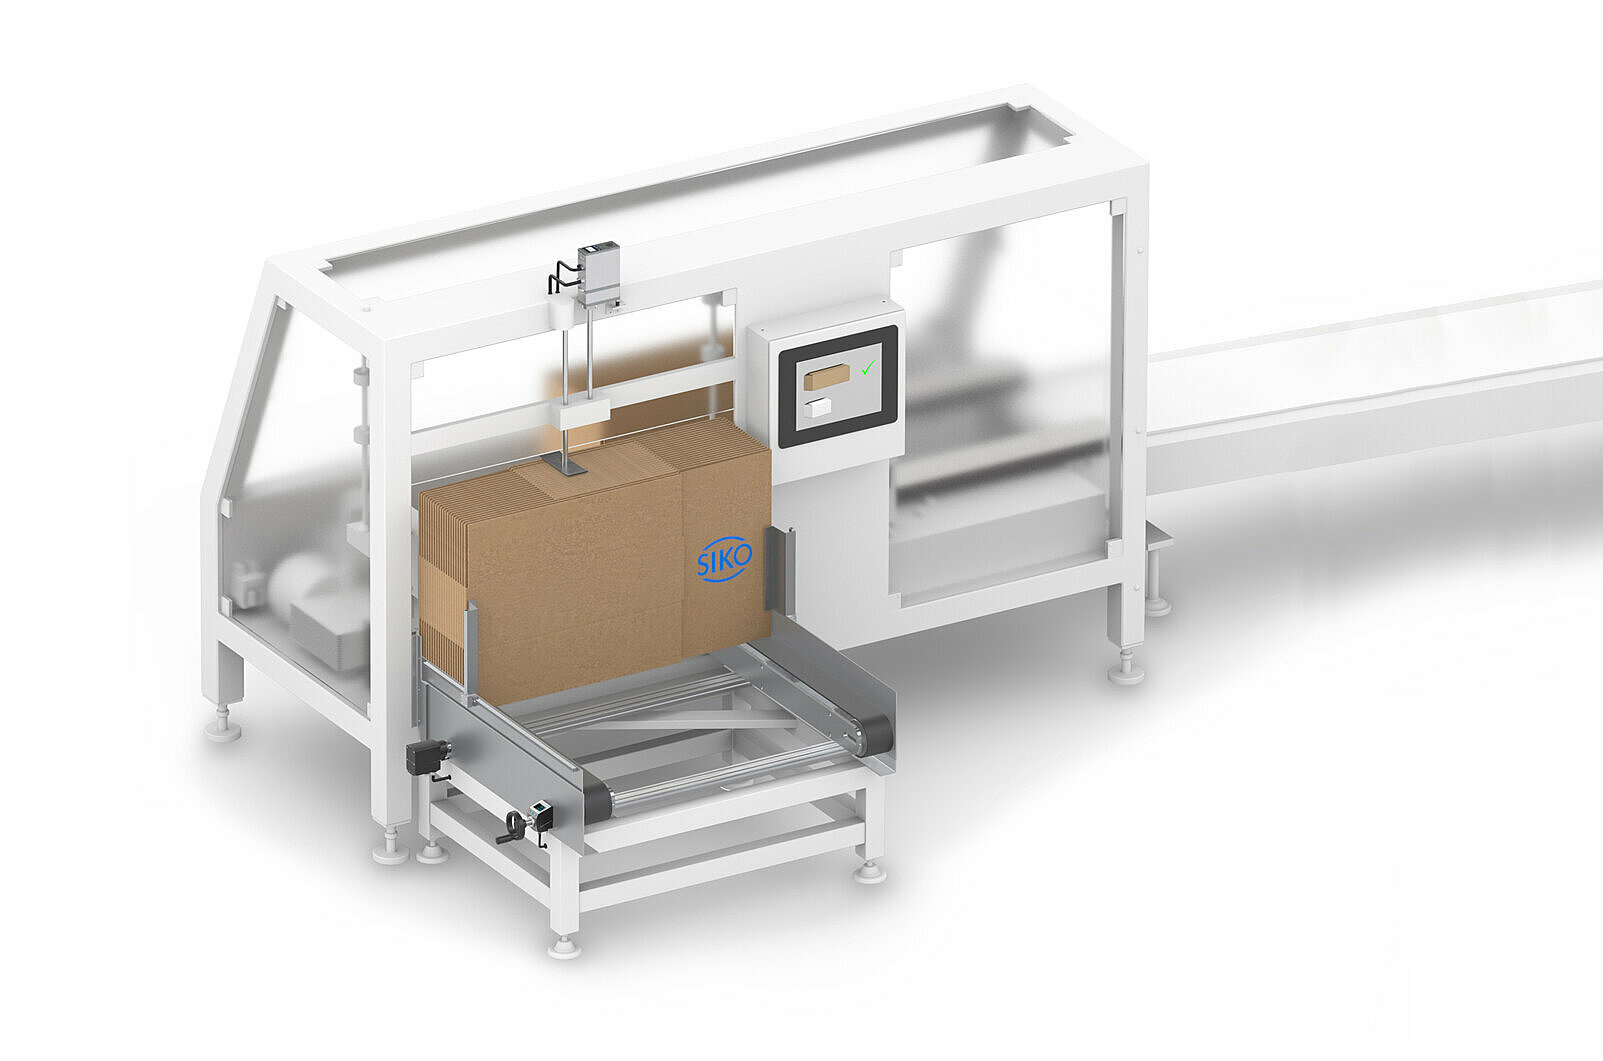 SIKO positioning systems for carton erectors without icons